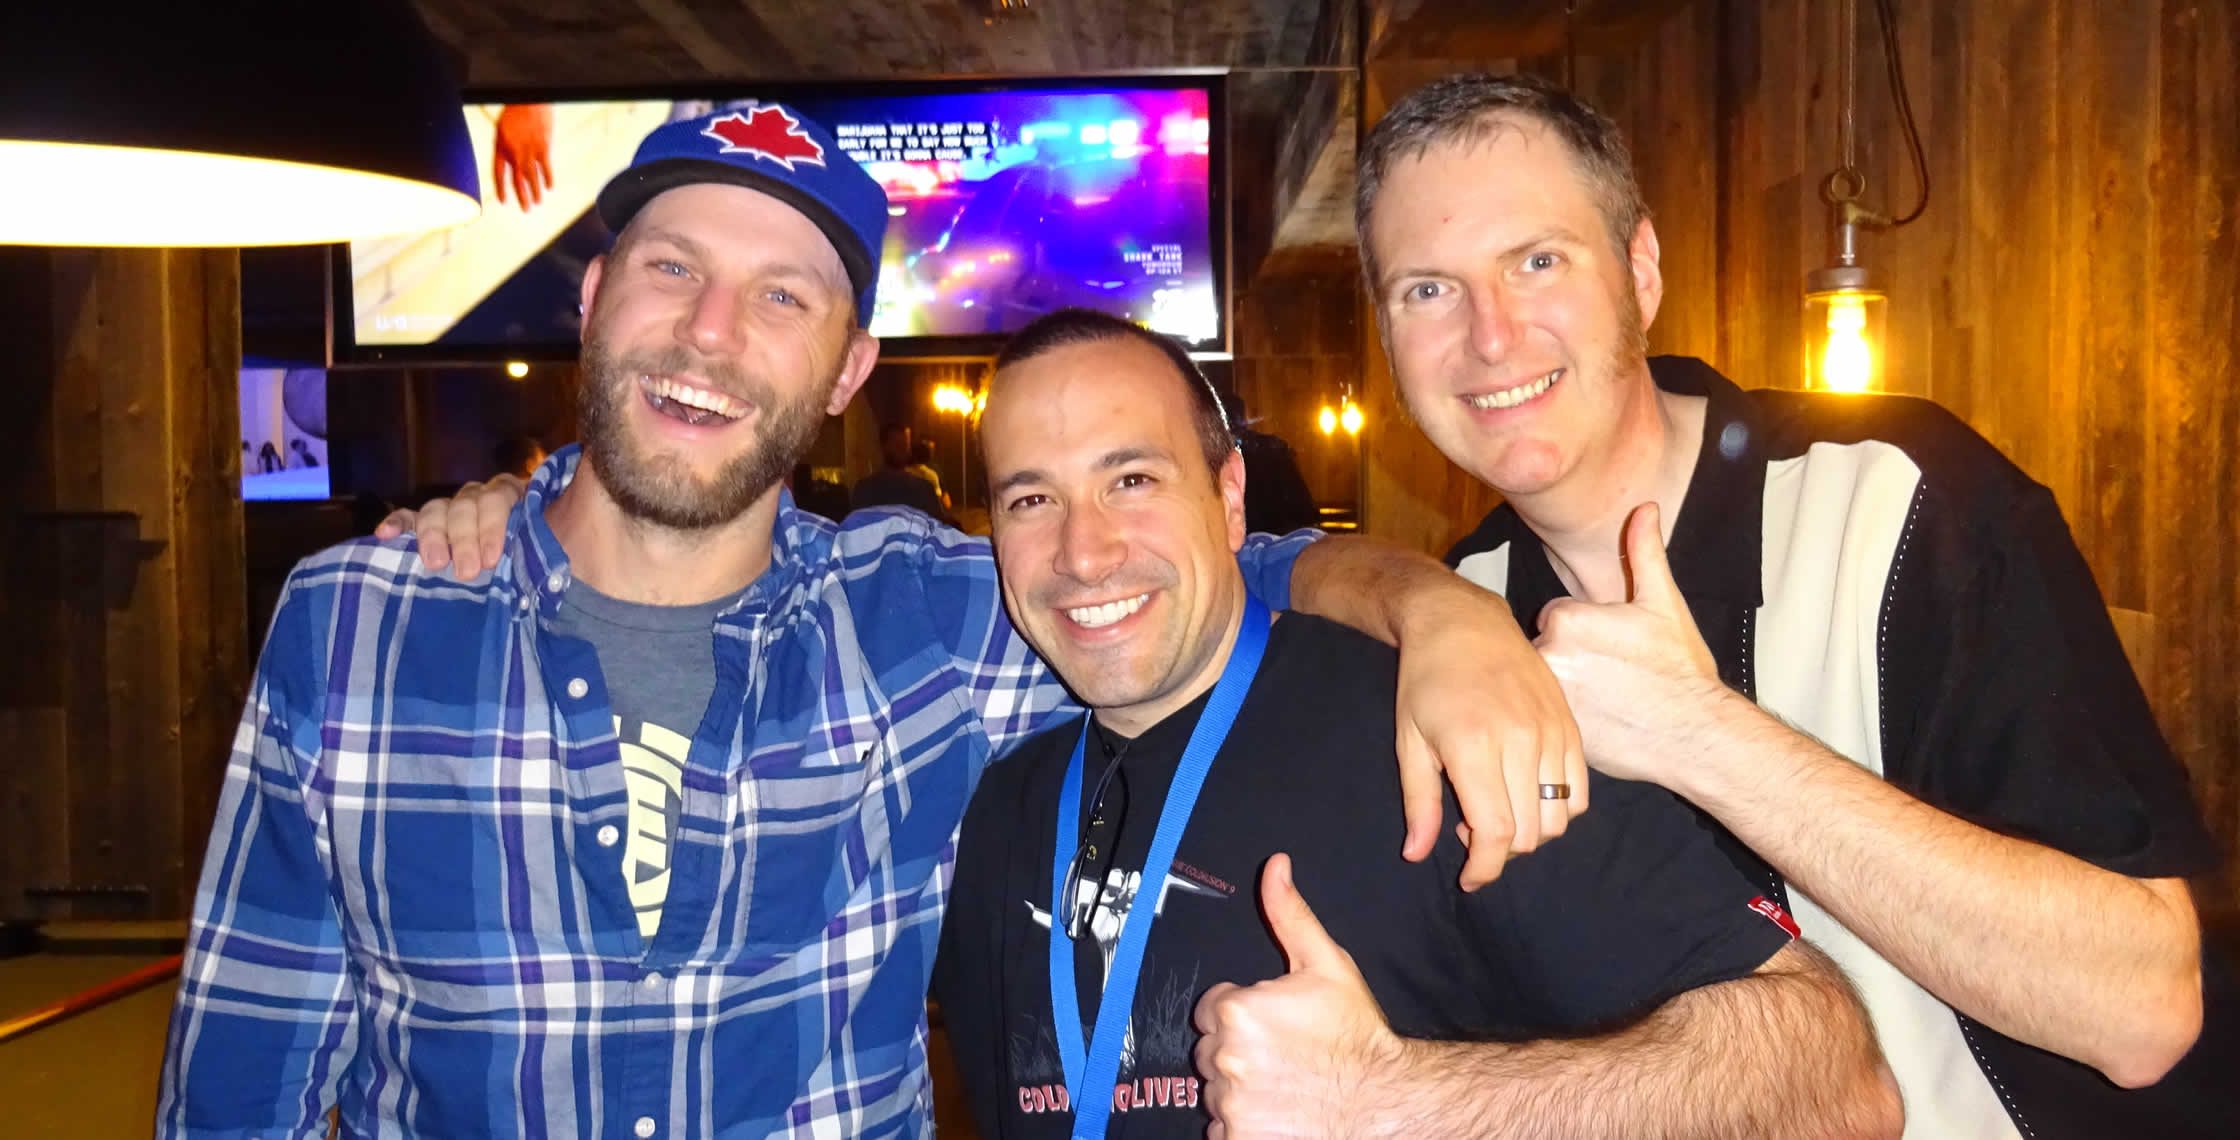 Ben Nadel at cf.Objective() 2014 (Bloomington, MN) with: Matt Vickers and Christian Ready